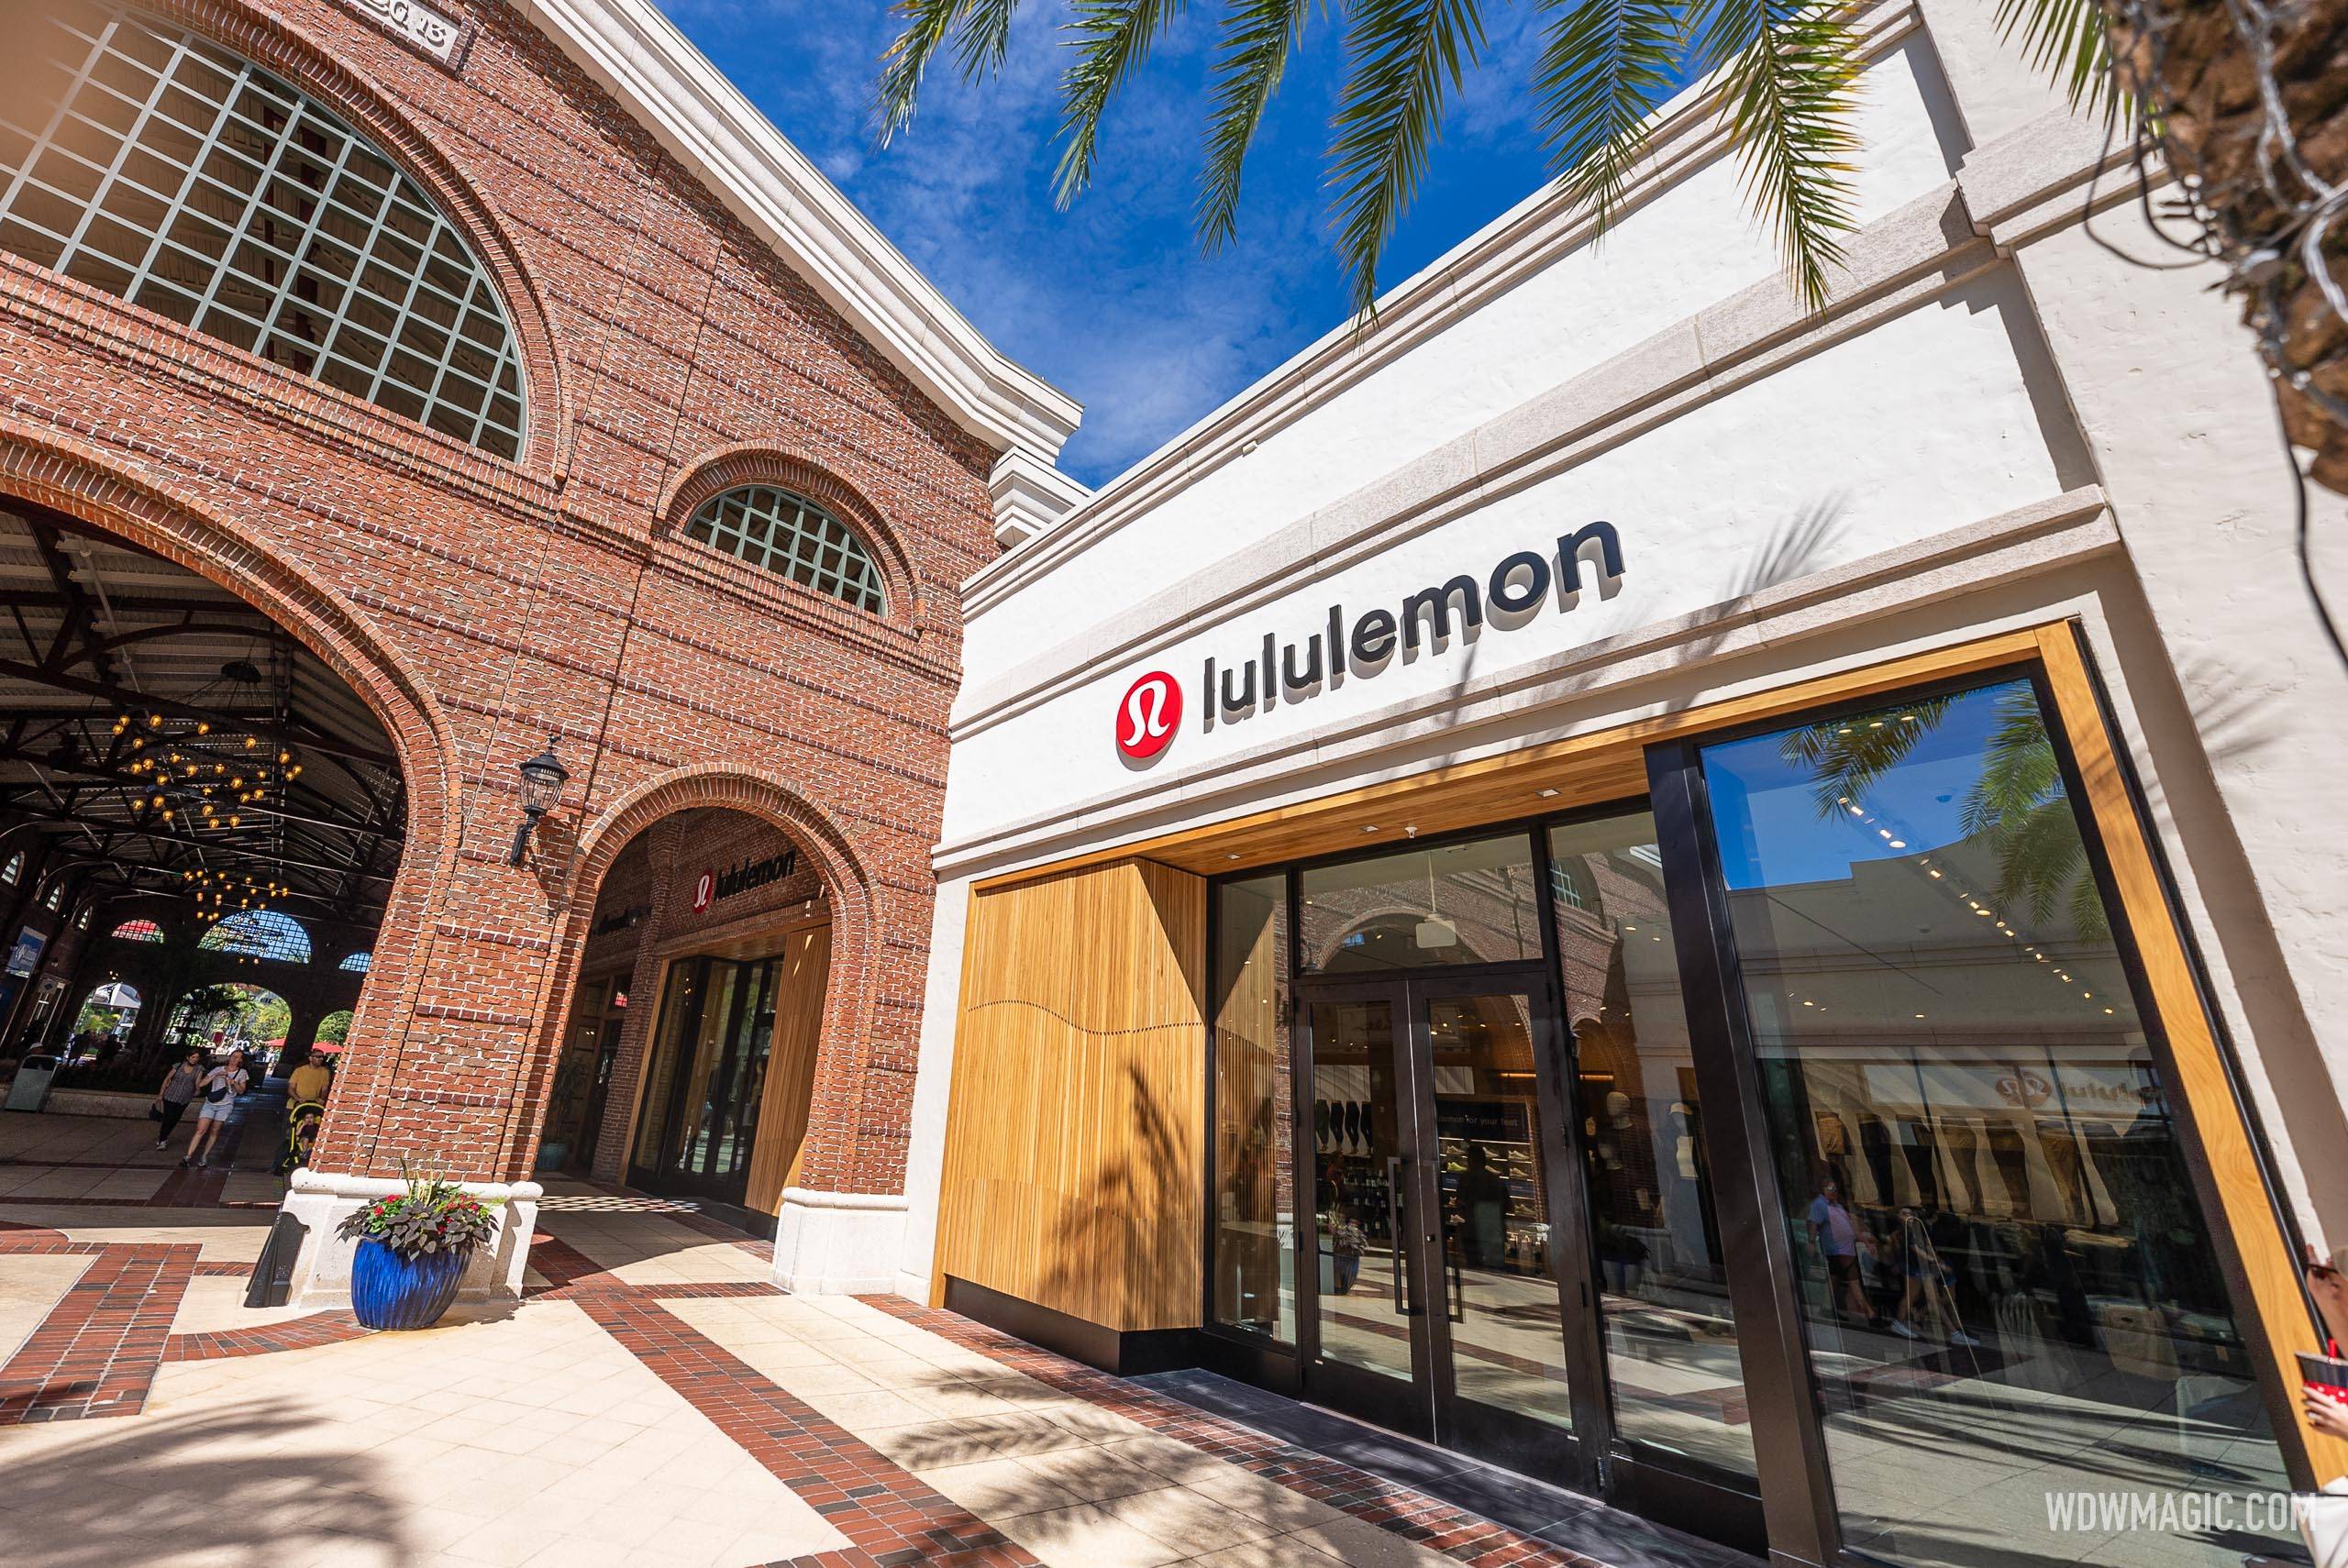 Lululemon opens in new larger location at Disney Springs in Walt